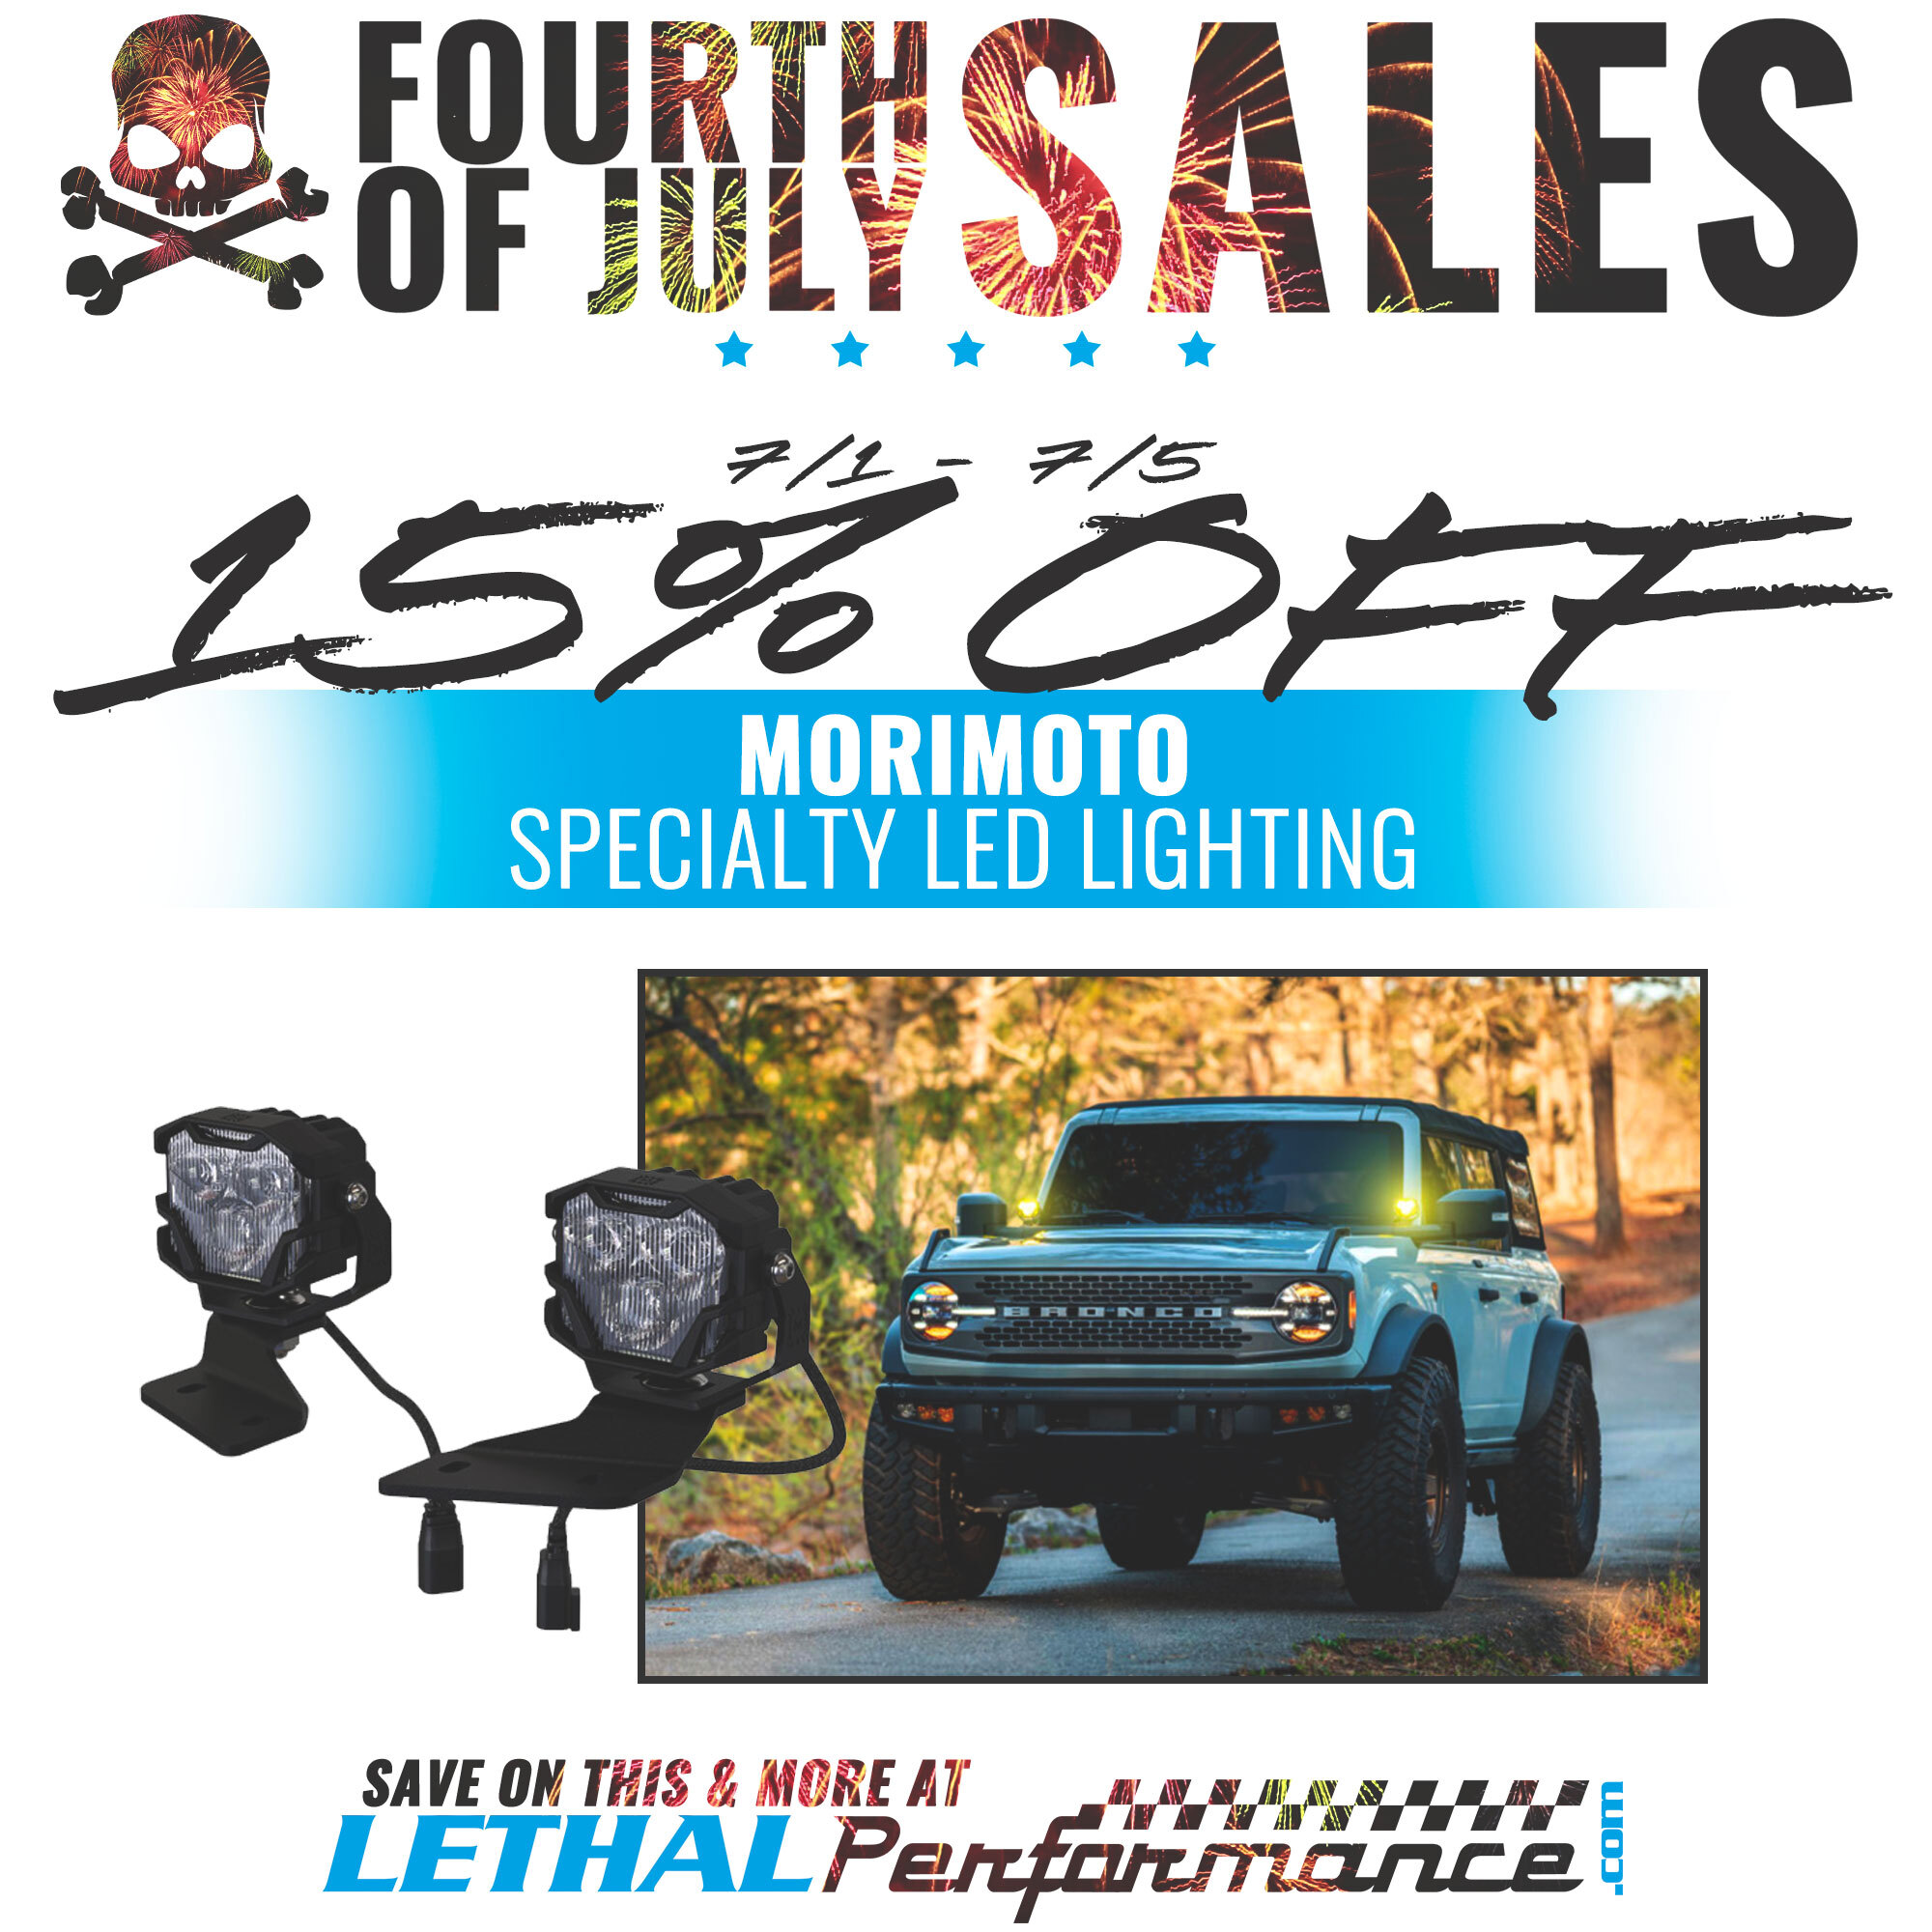 Ford Bronco 4th of July SALES kick off today!! Site-wide, Lethal Performance Drag Packs & MORE!!! morimoto_bronco